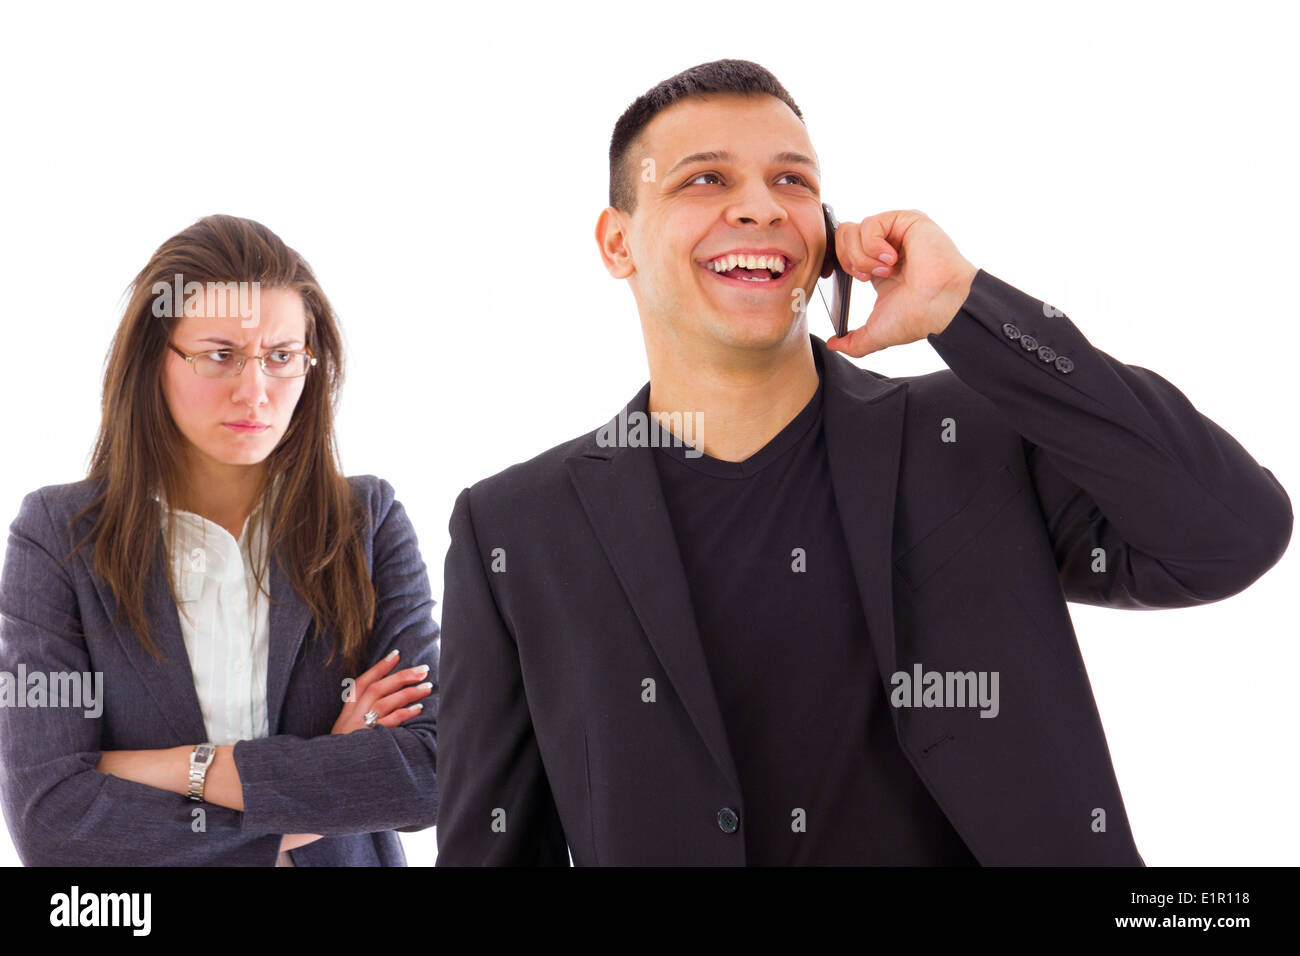 angry jealous woman suspecting on infidelity while her man is talking on the phone Stock Photo